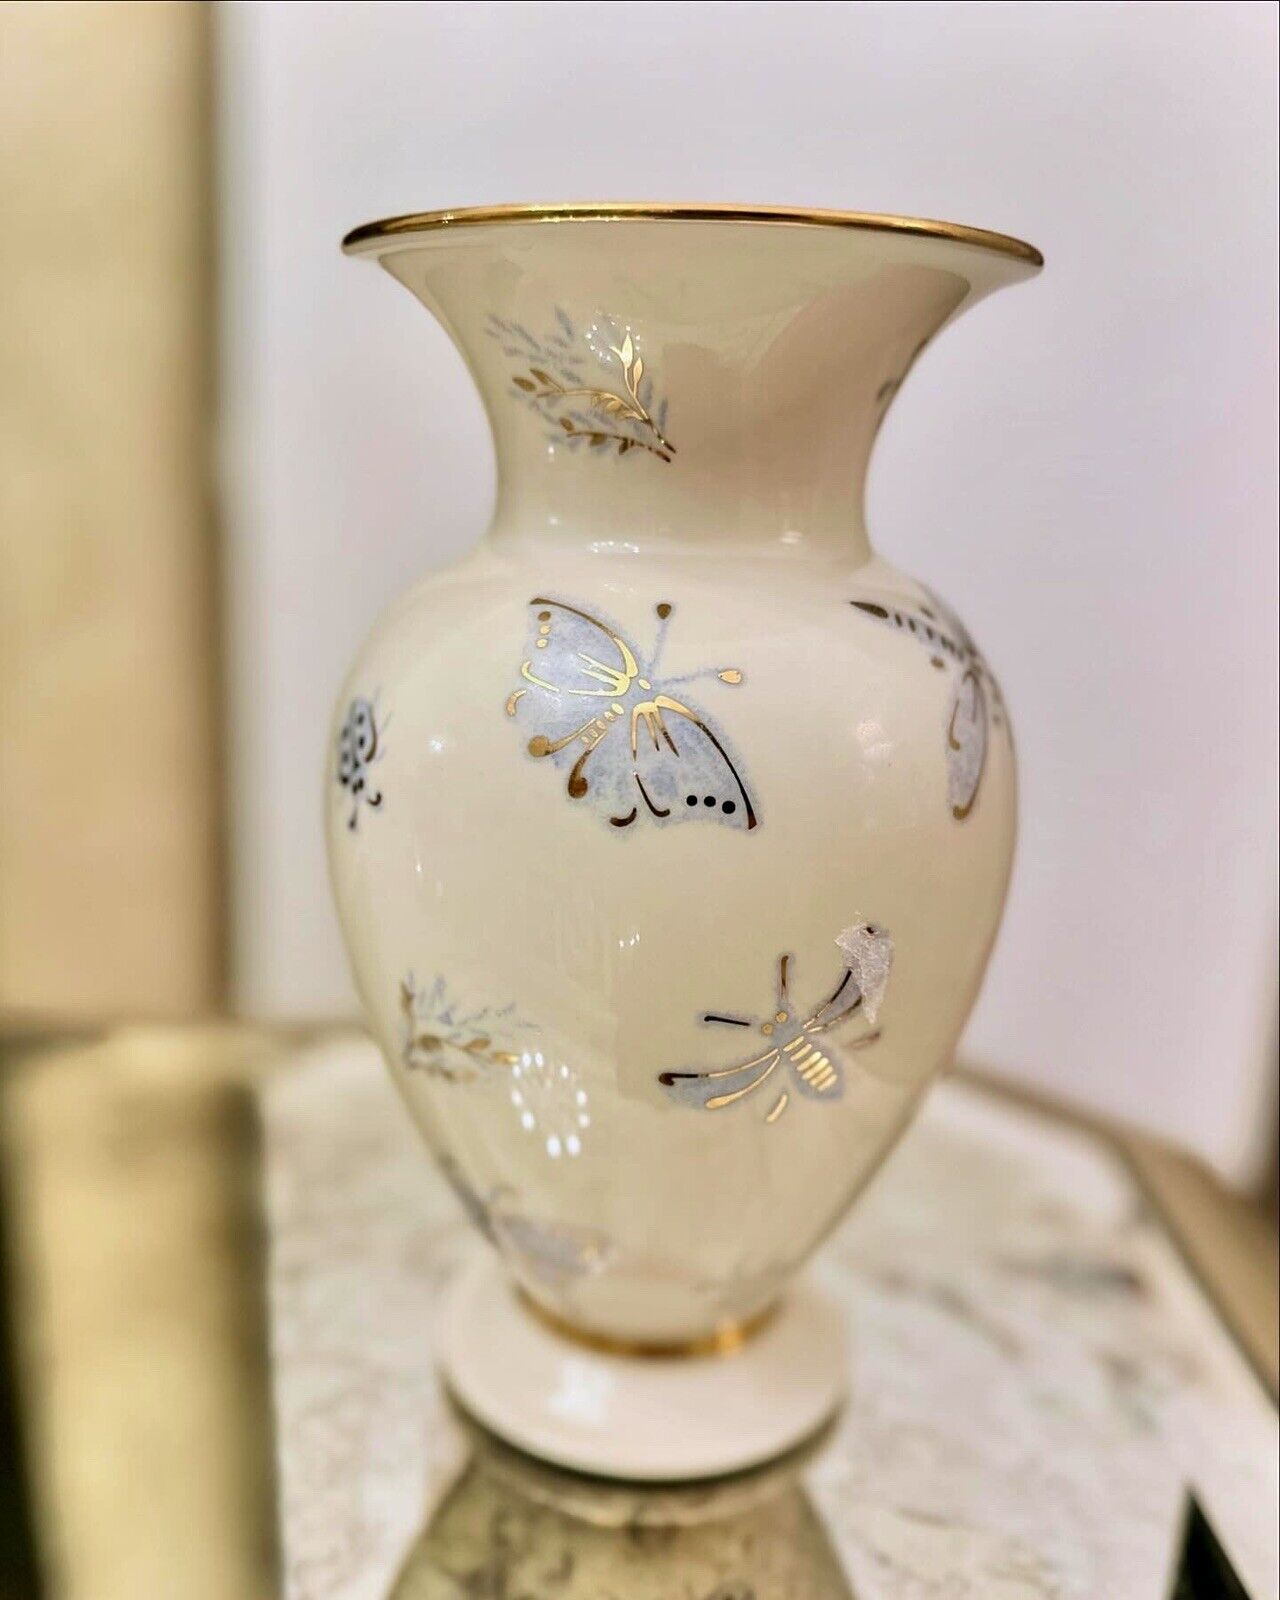 Limited Edition Lenox “The Sunshine Meadow Collection” Vase